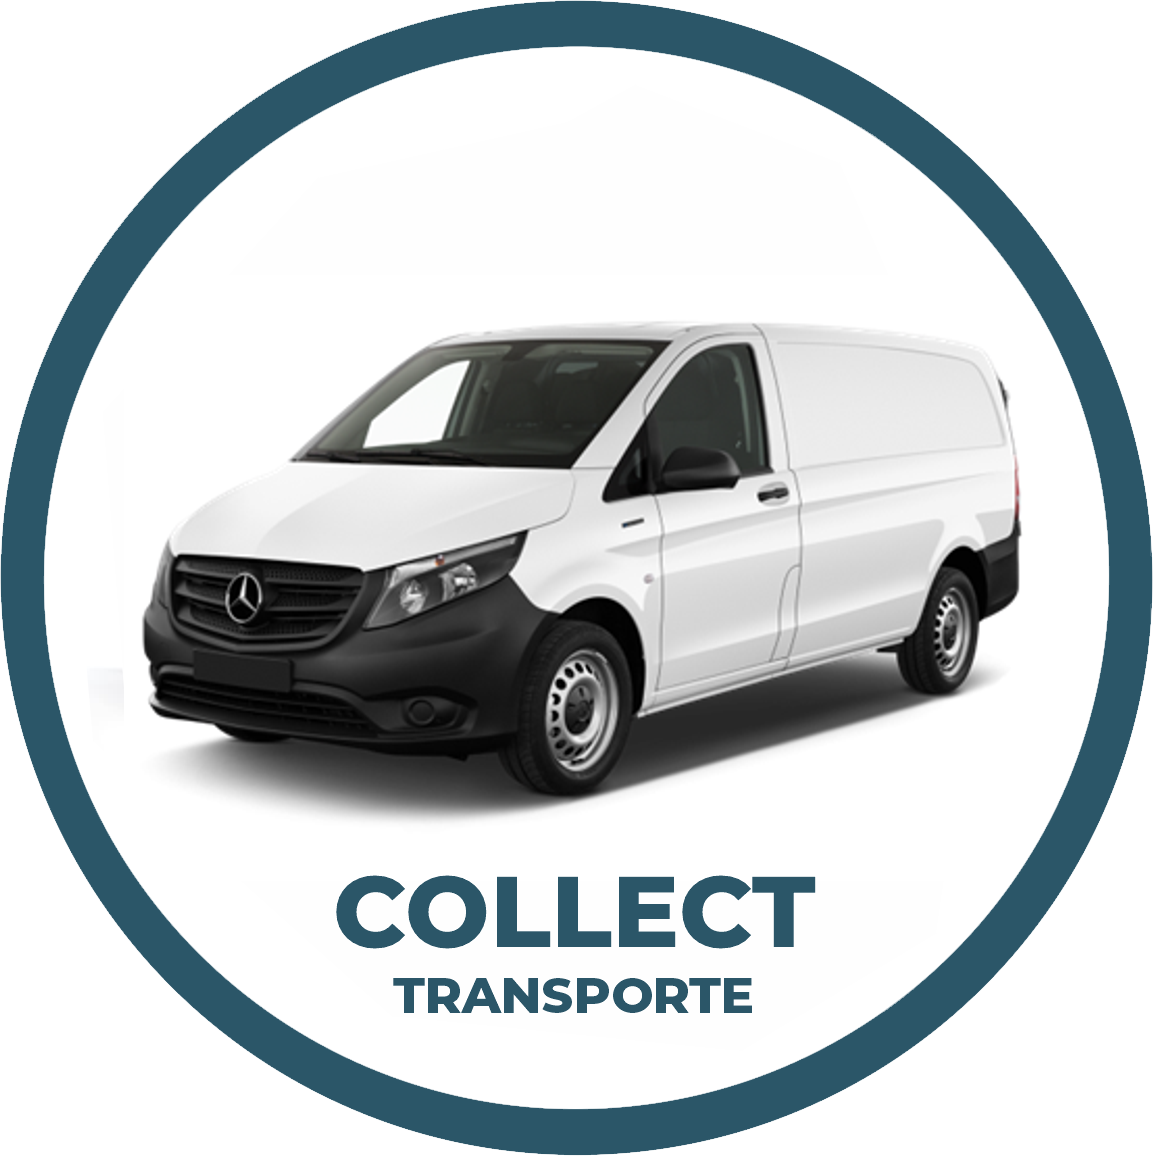 COLLECT TRANSPORTE